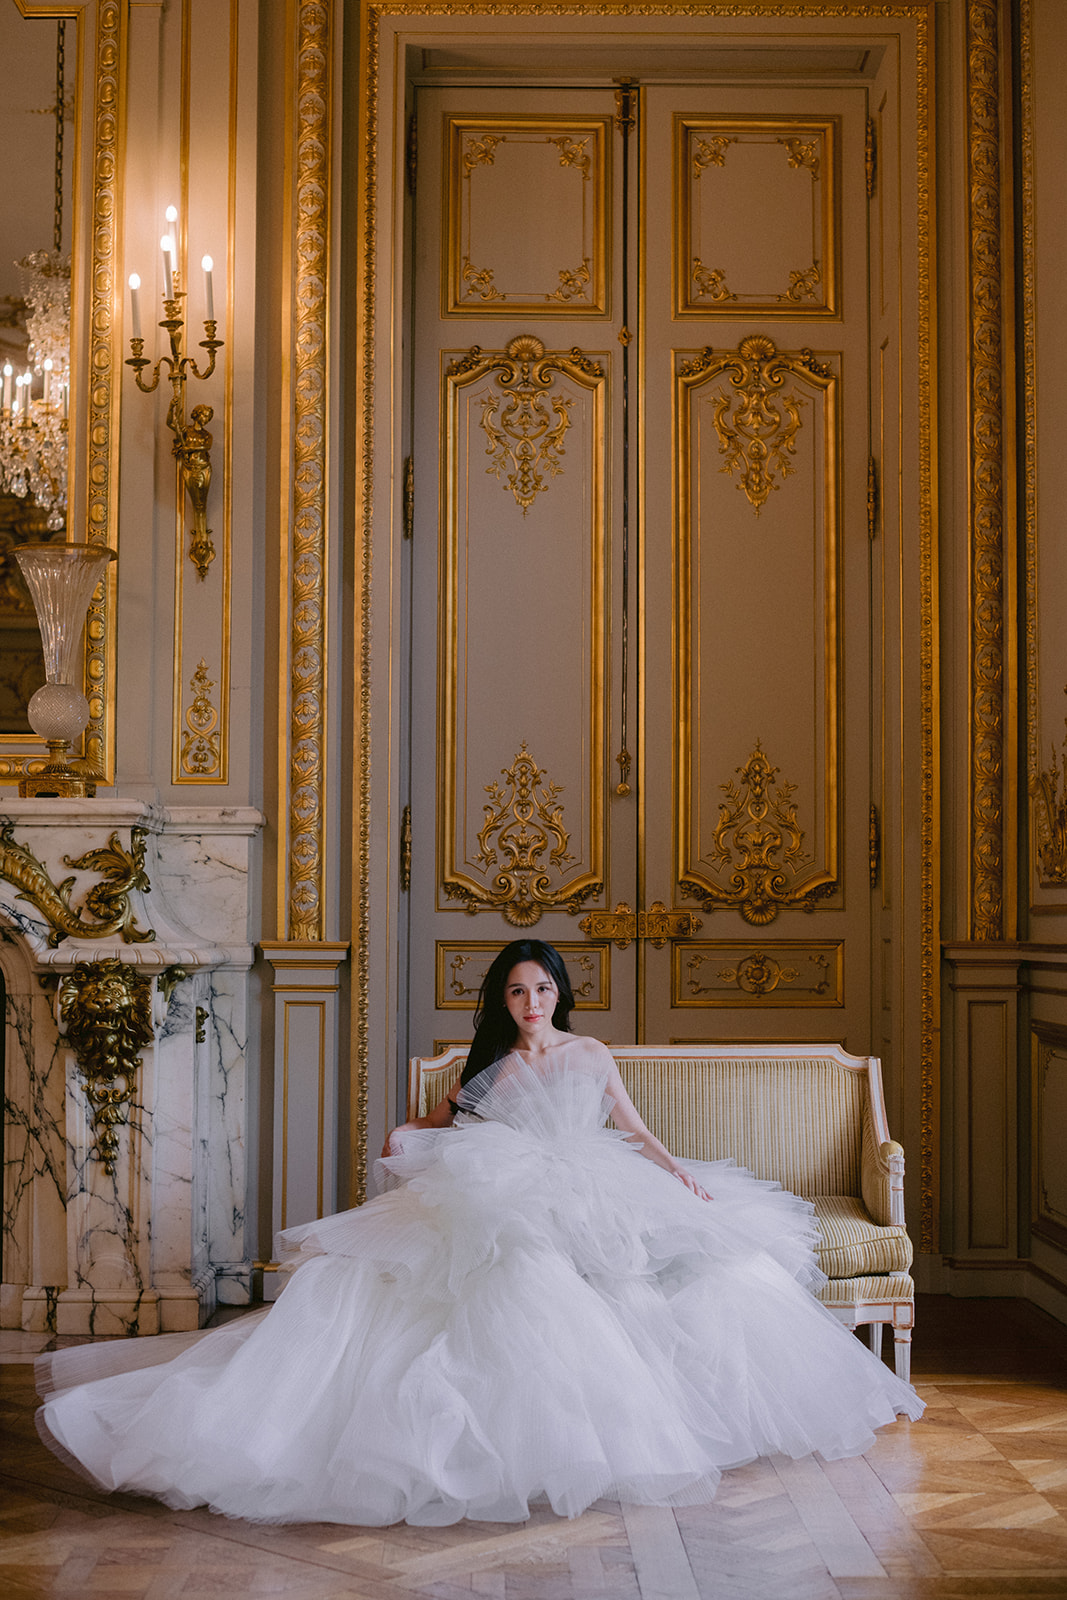  the bride is sitting on an armchair in the reception room